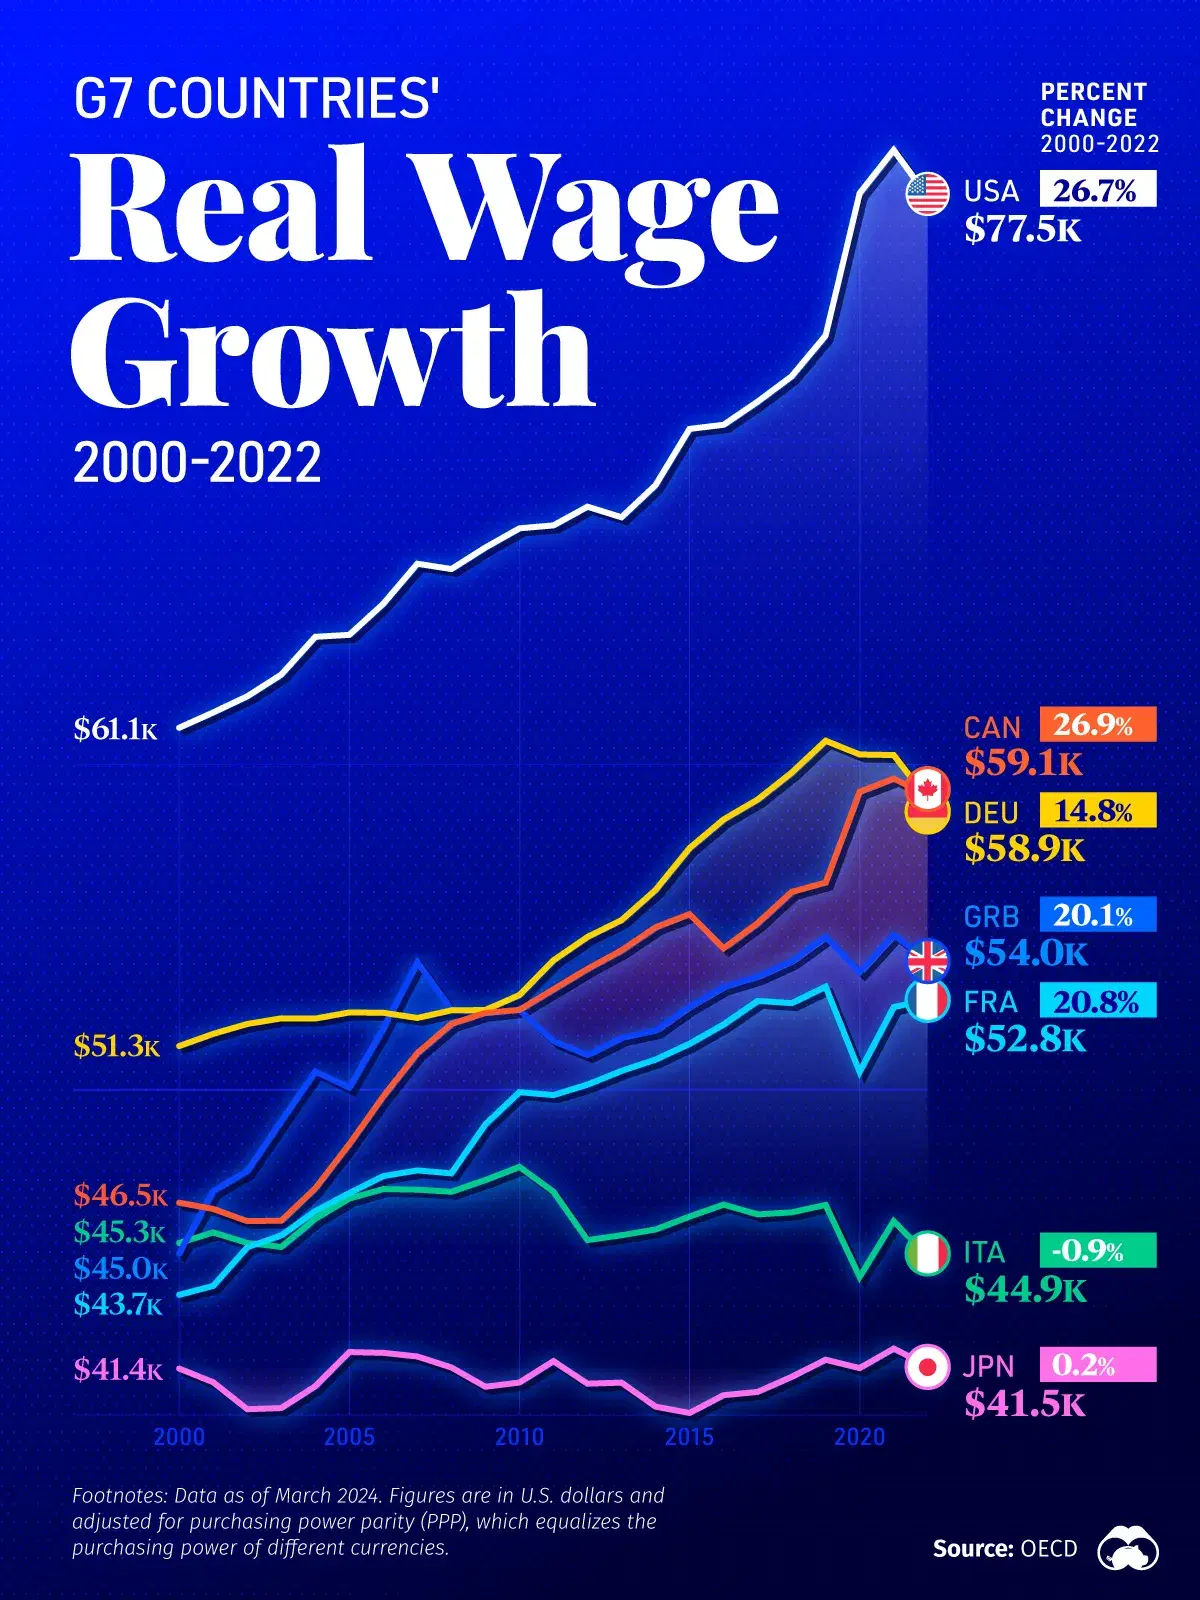 G7 Countries’ Real Wage Growth from 2000 to 2022